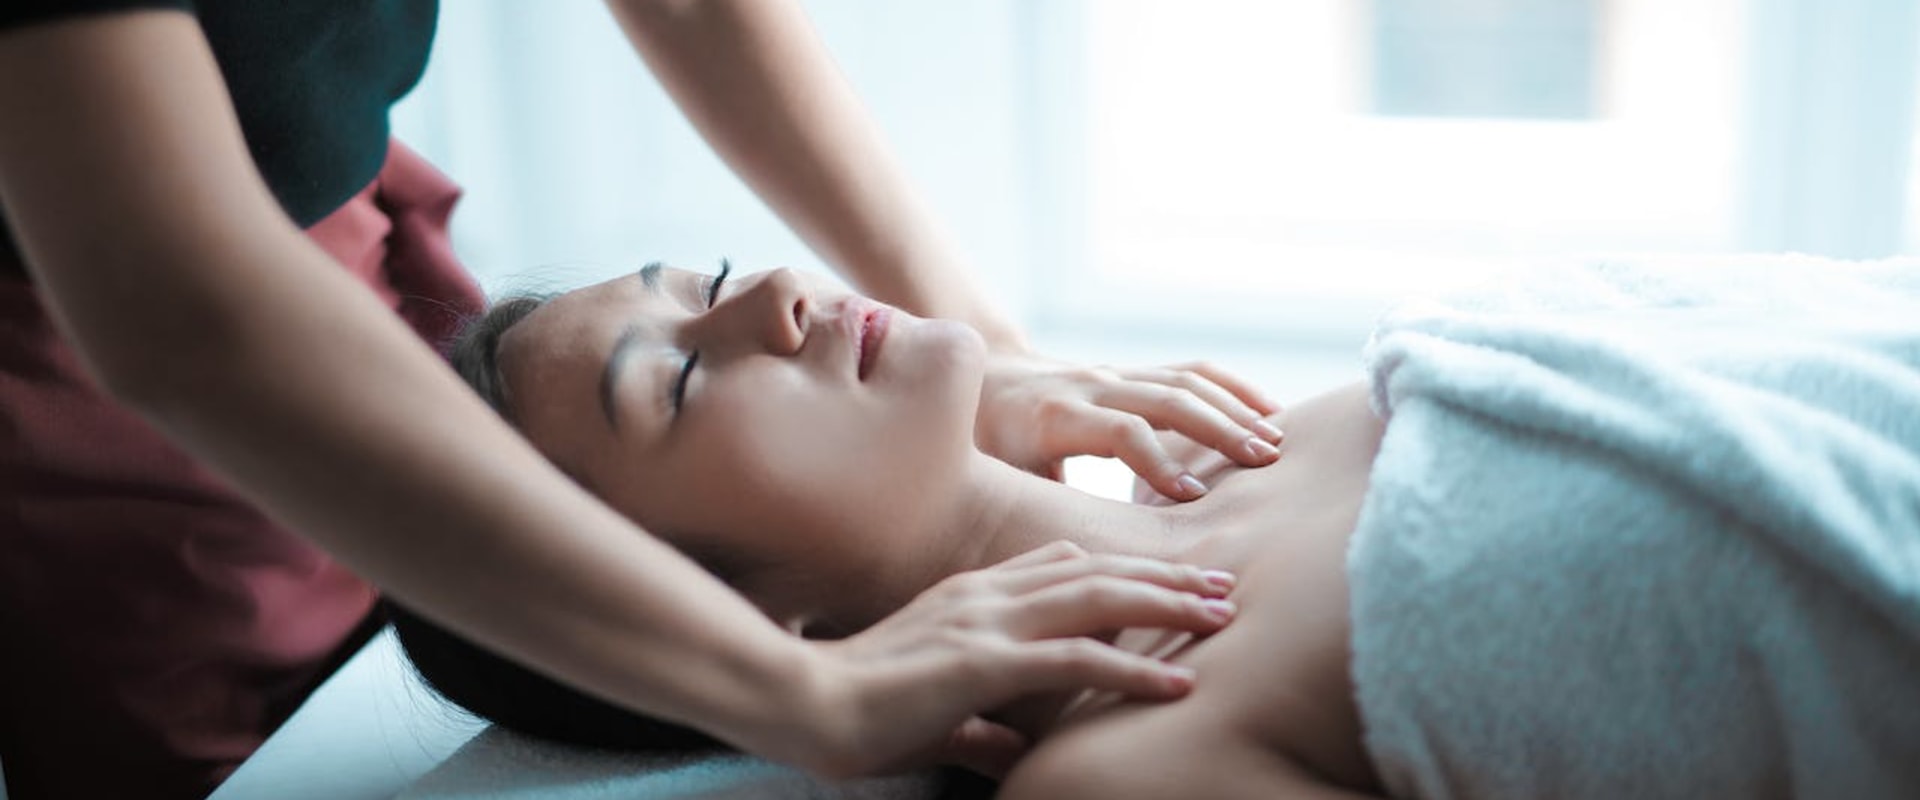 Enhancing Health And Happiness: The Benefits Of Massage Therapy In Victoria